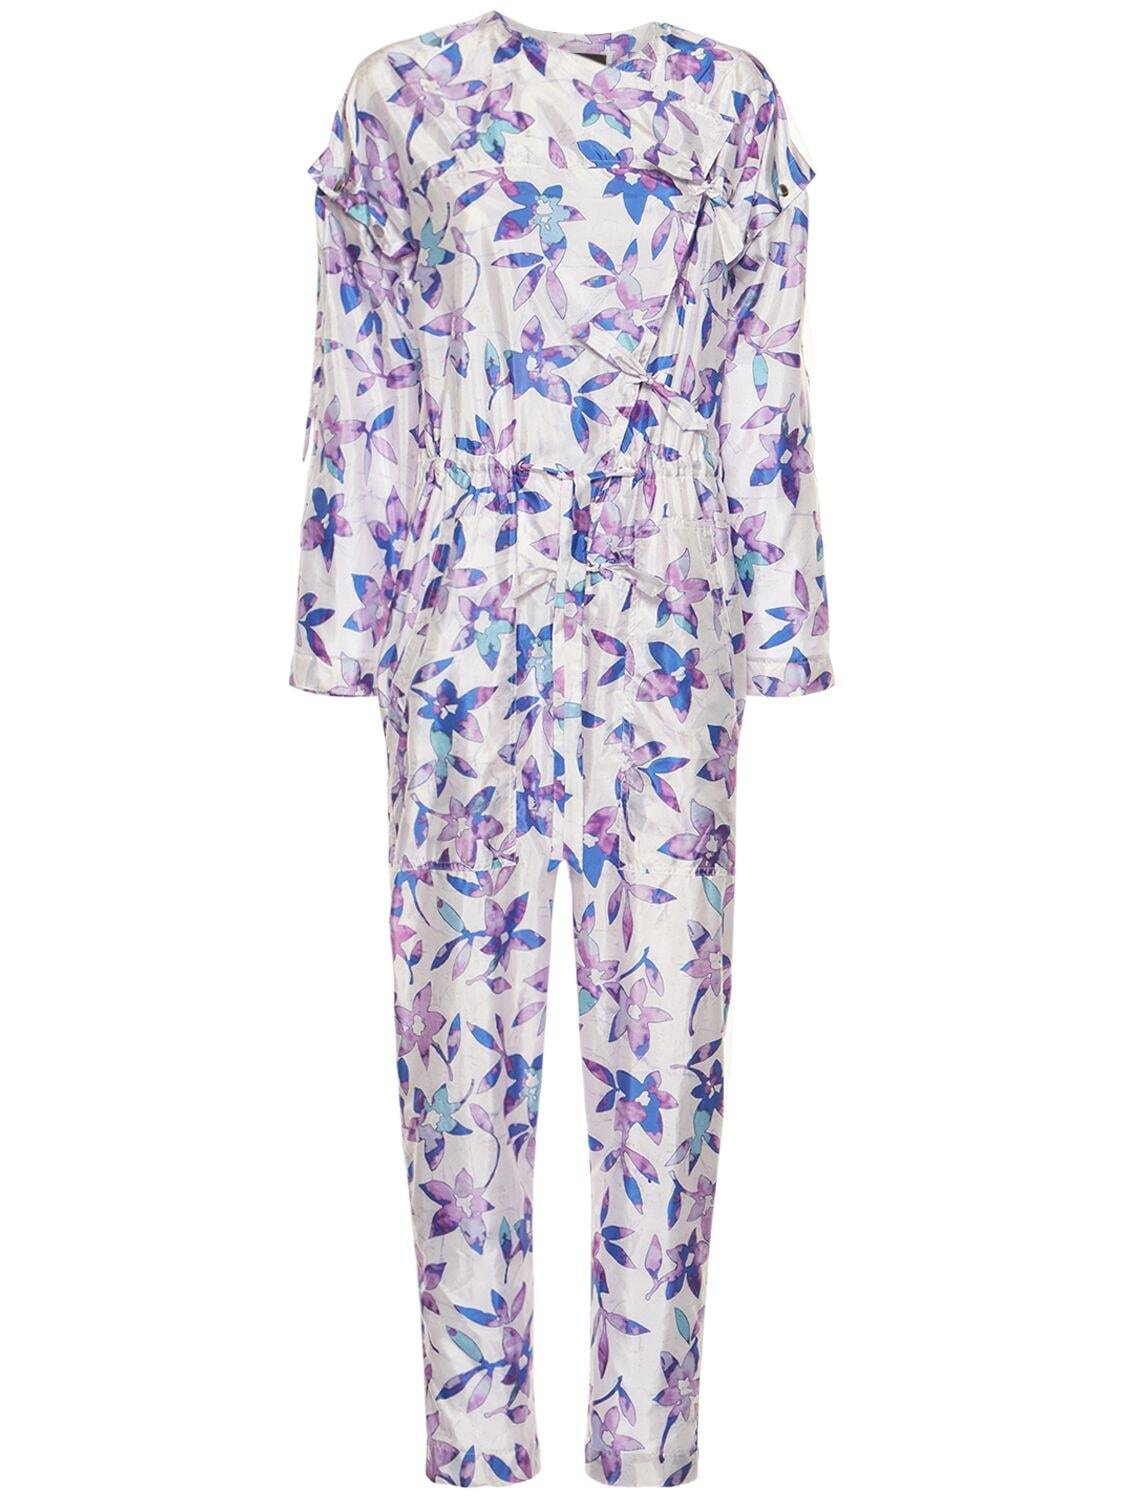 ISABEL MARANT Lympia Printed Silk Blend Jumpsuit in white / multi